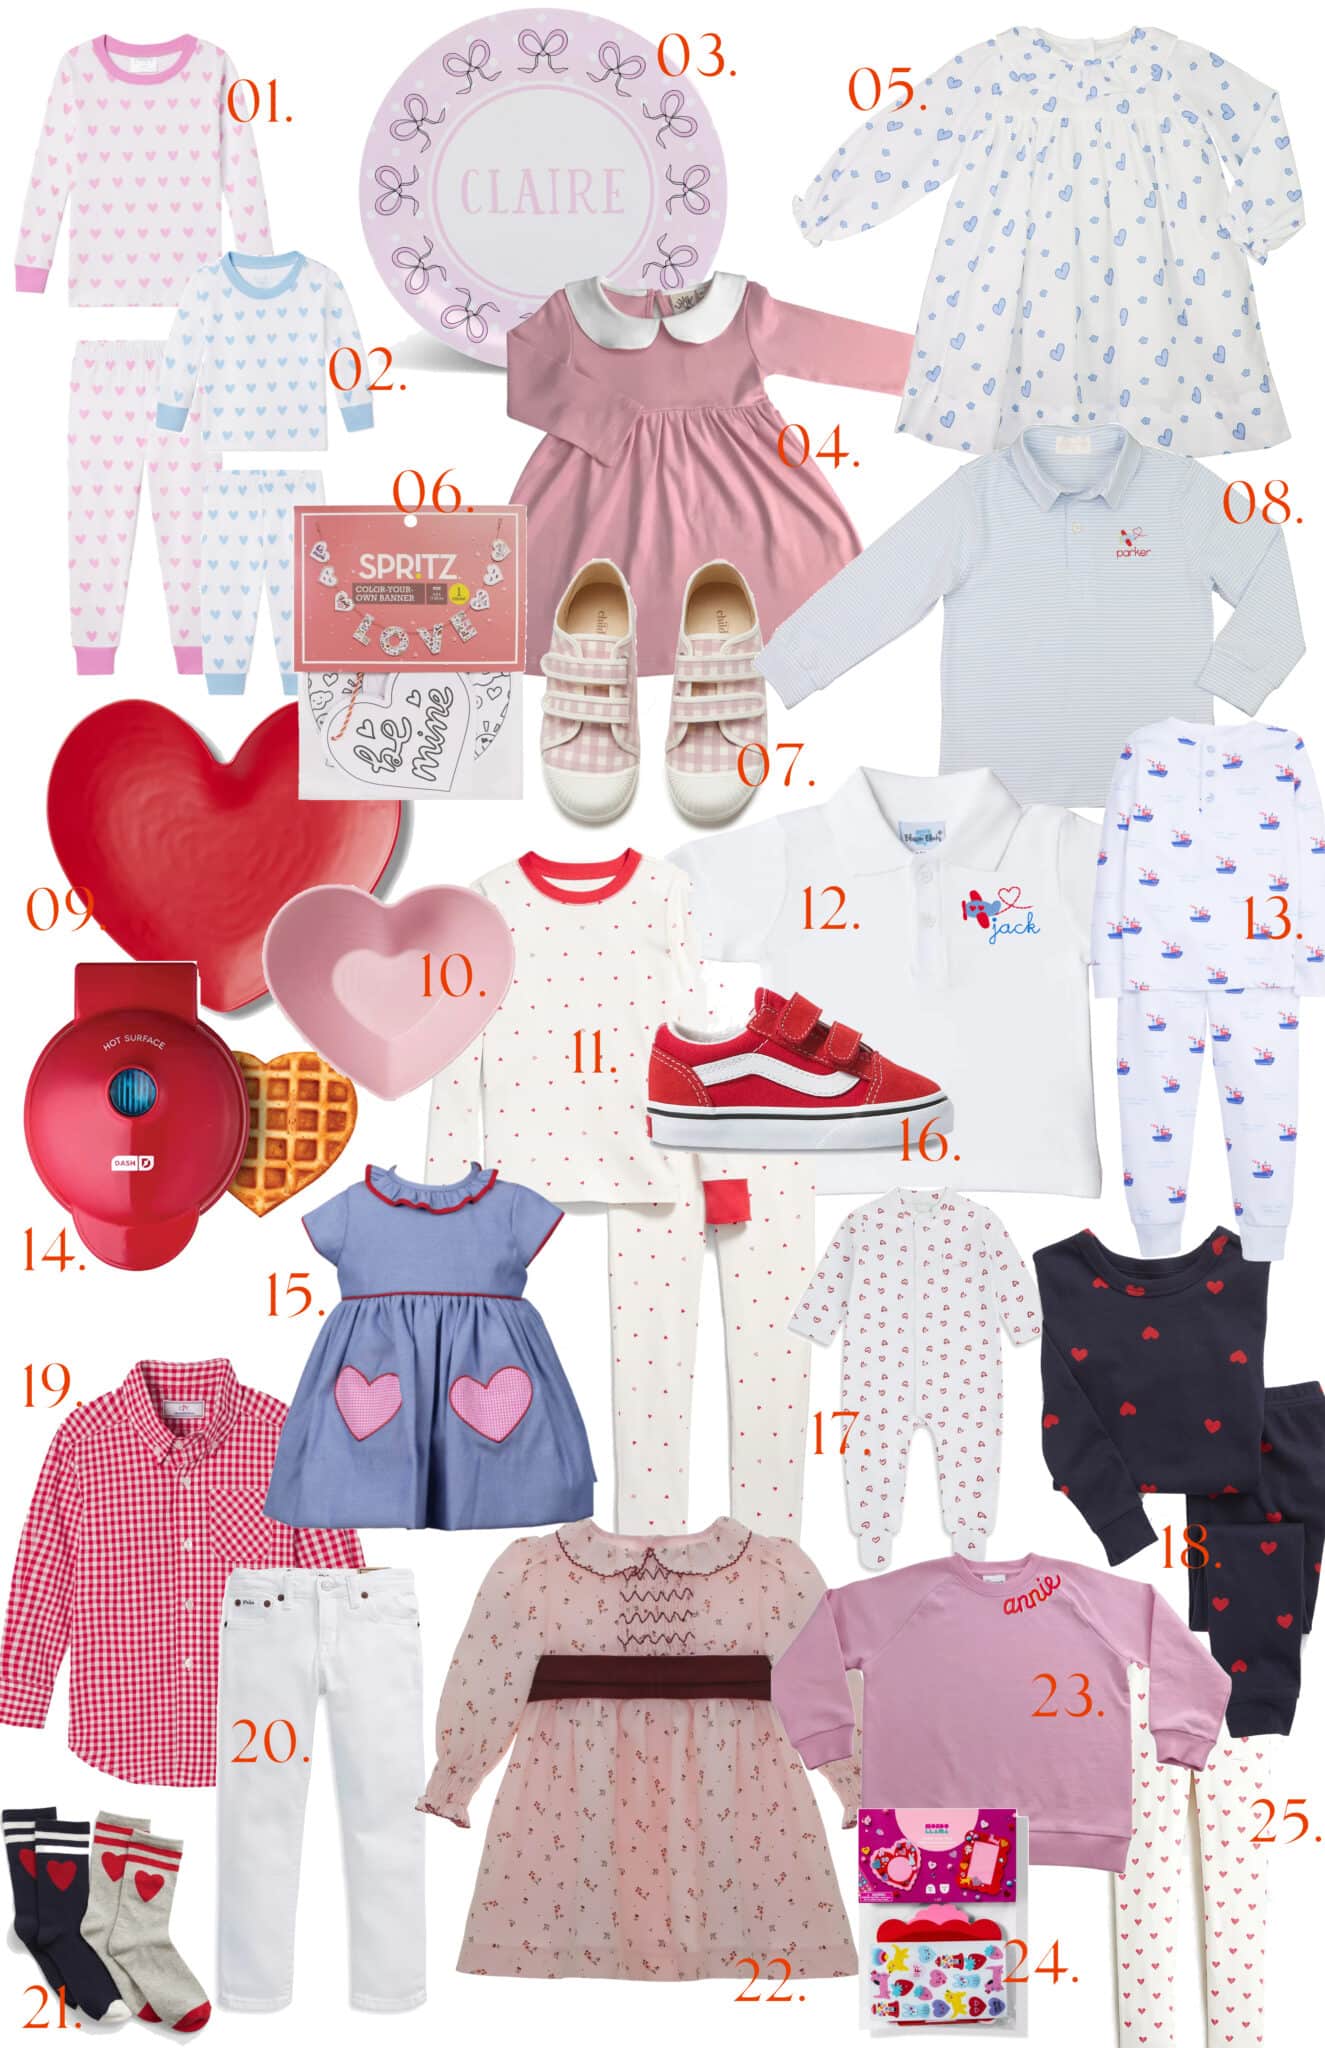 VALENTINE'S DAY OUTFIT IDEAS FOR CHILDREN